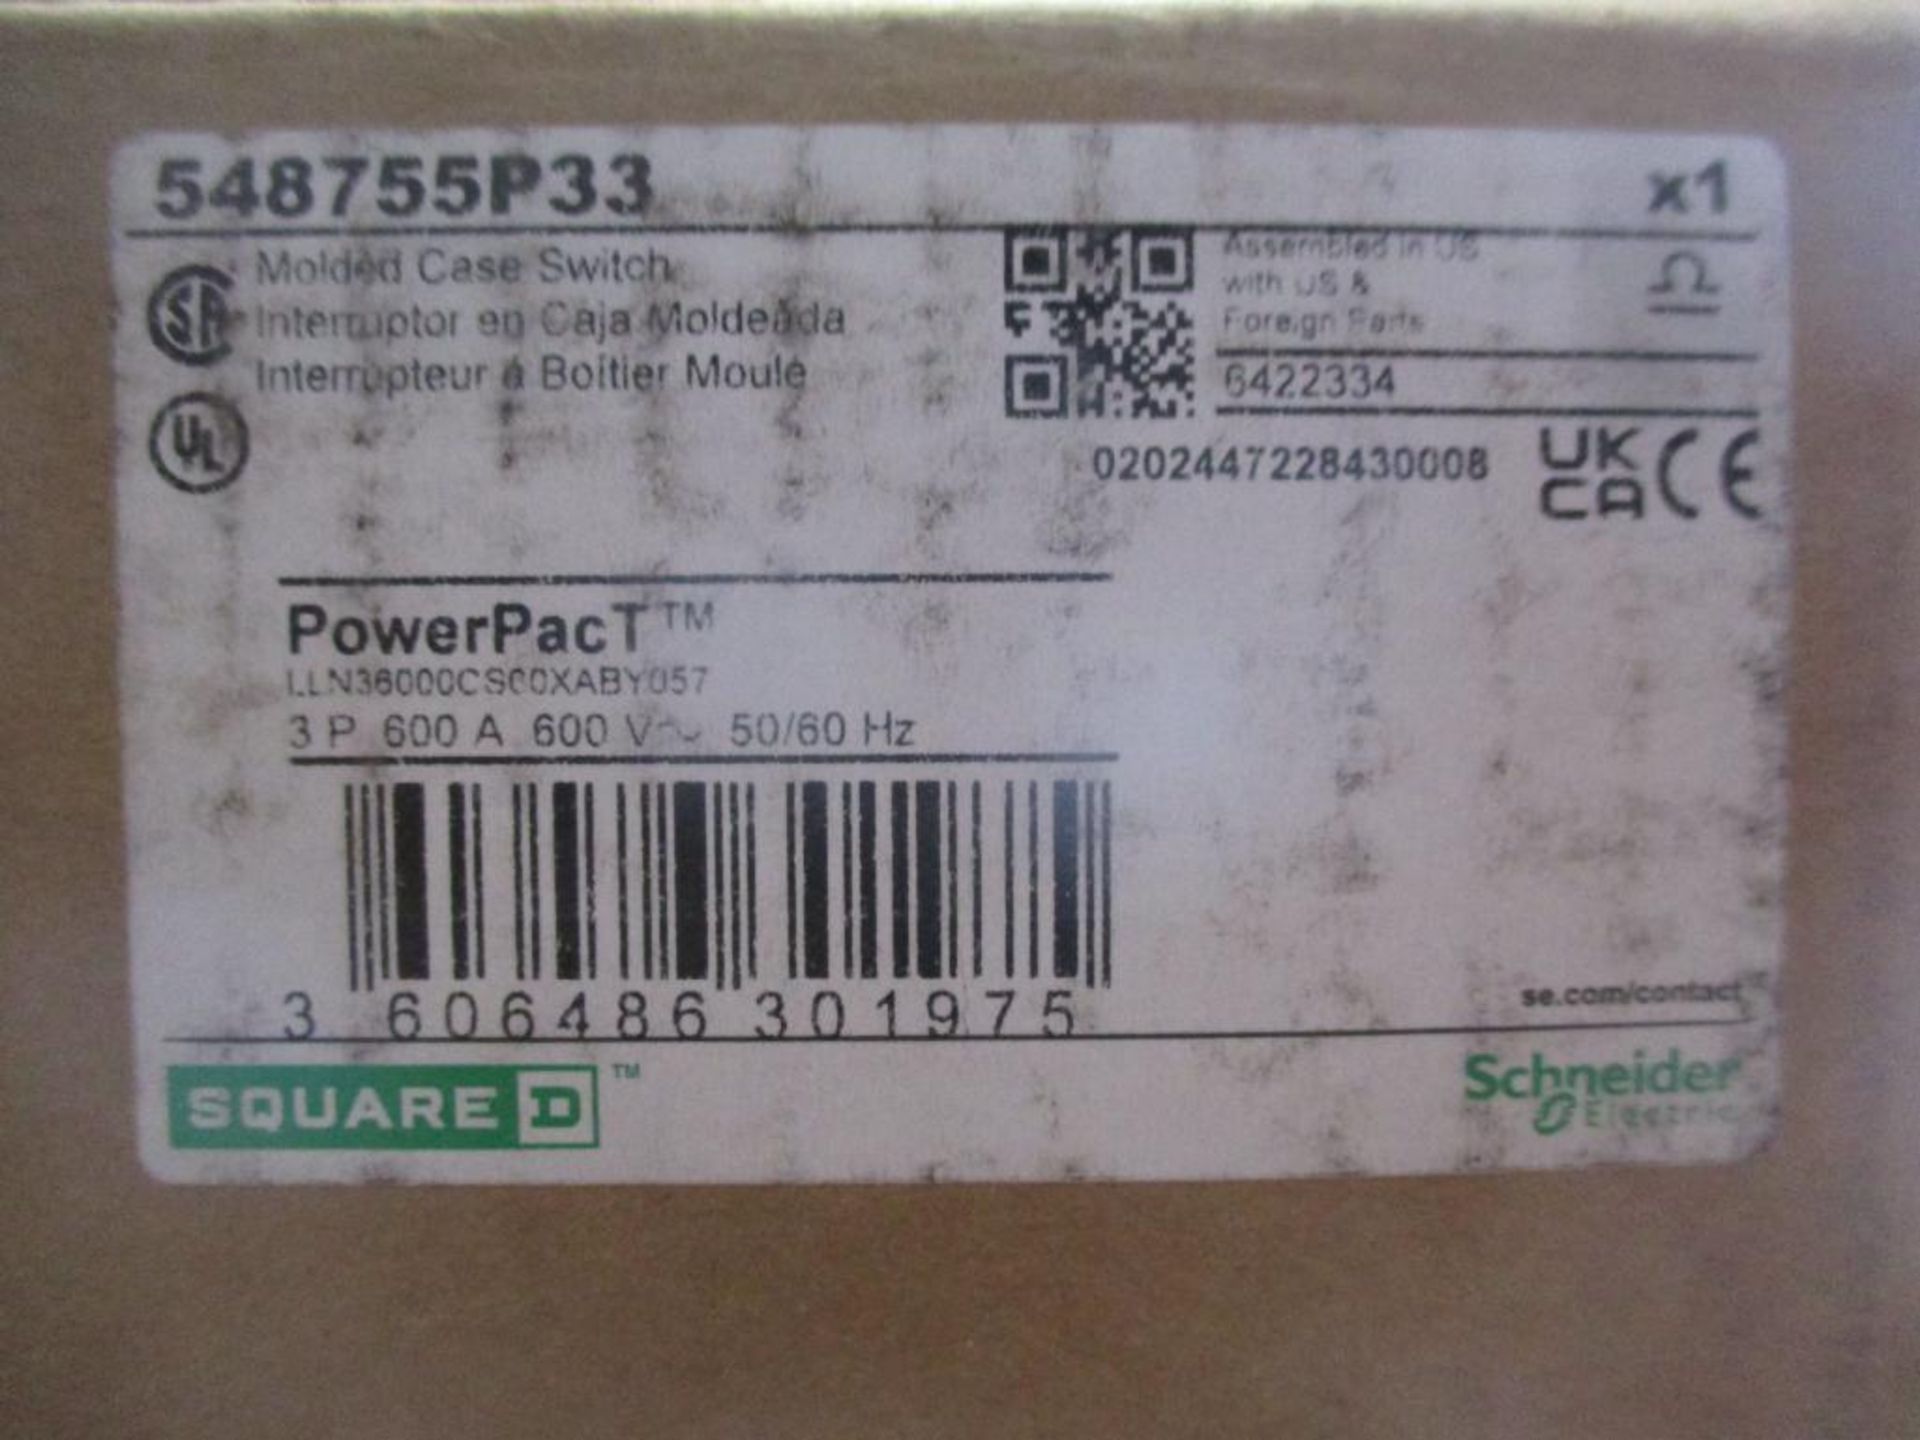 Square D 600 AMP Circuit Breaker, 548755P33, 3P, 600A, 600 VAC, PowerPacT (New in Box) - Image 4 of 4